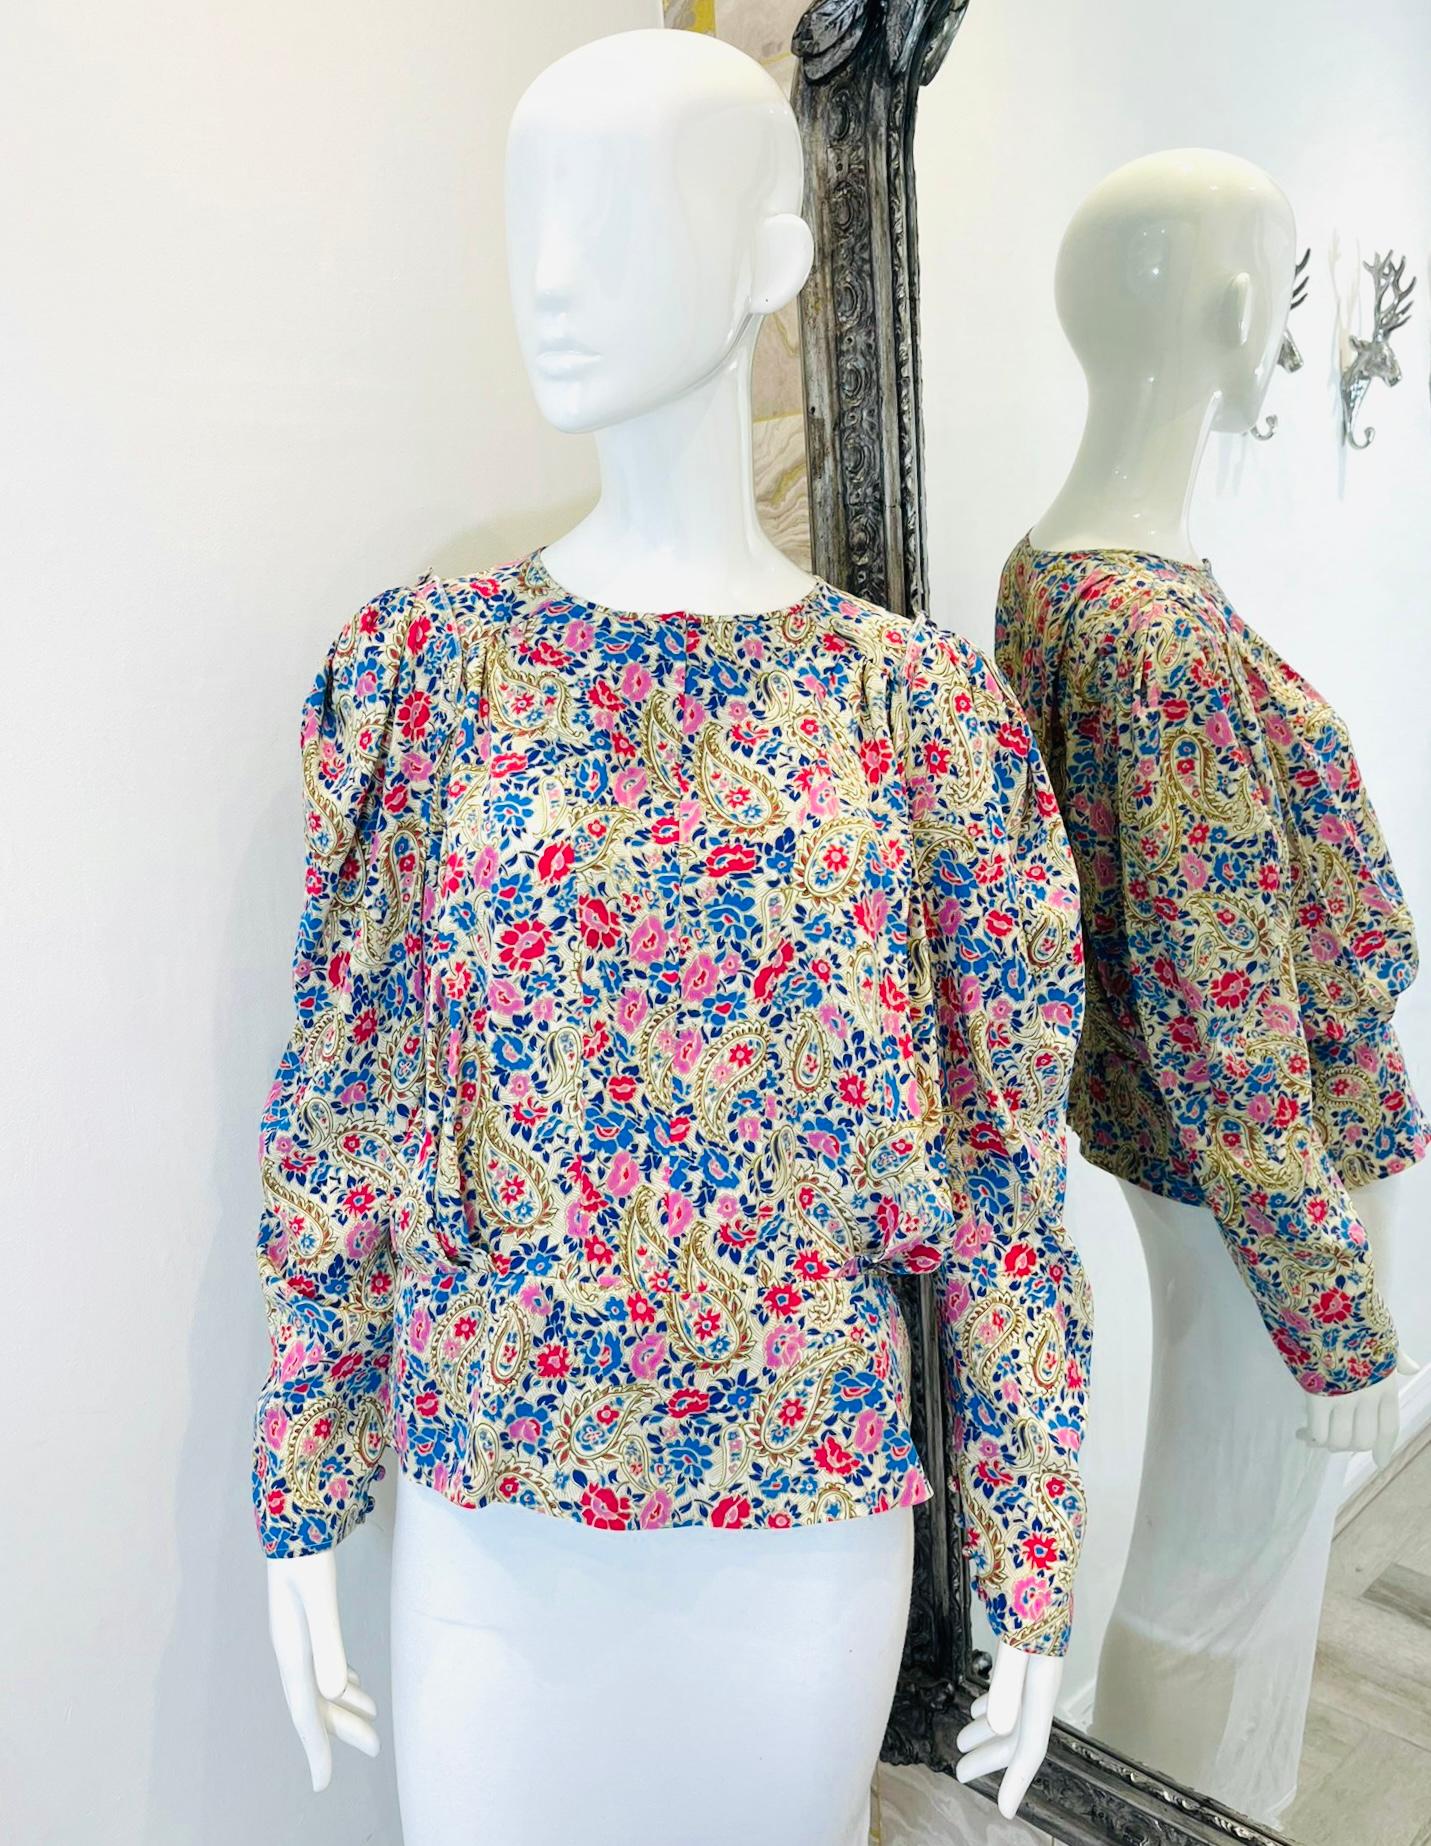 Isabel Marant Floral Silk Top

Multicoloured, floral patterned blouse designed with long puffed sleeves and pleat detail to the front.

Featuring round neckline and concealed zip fastening to rear. Rrp £700

Size – 44FR

Condition – Very